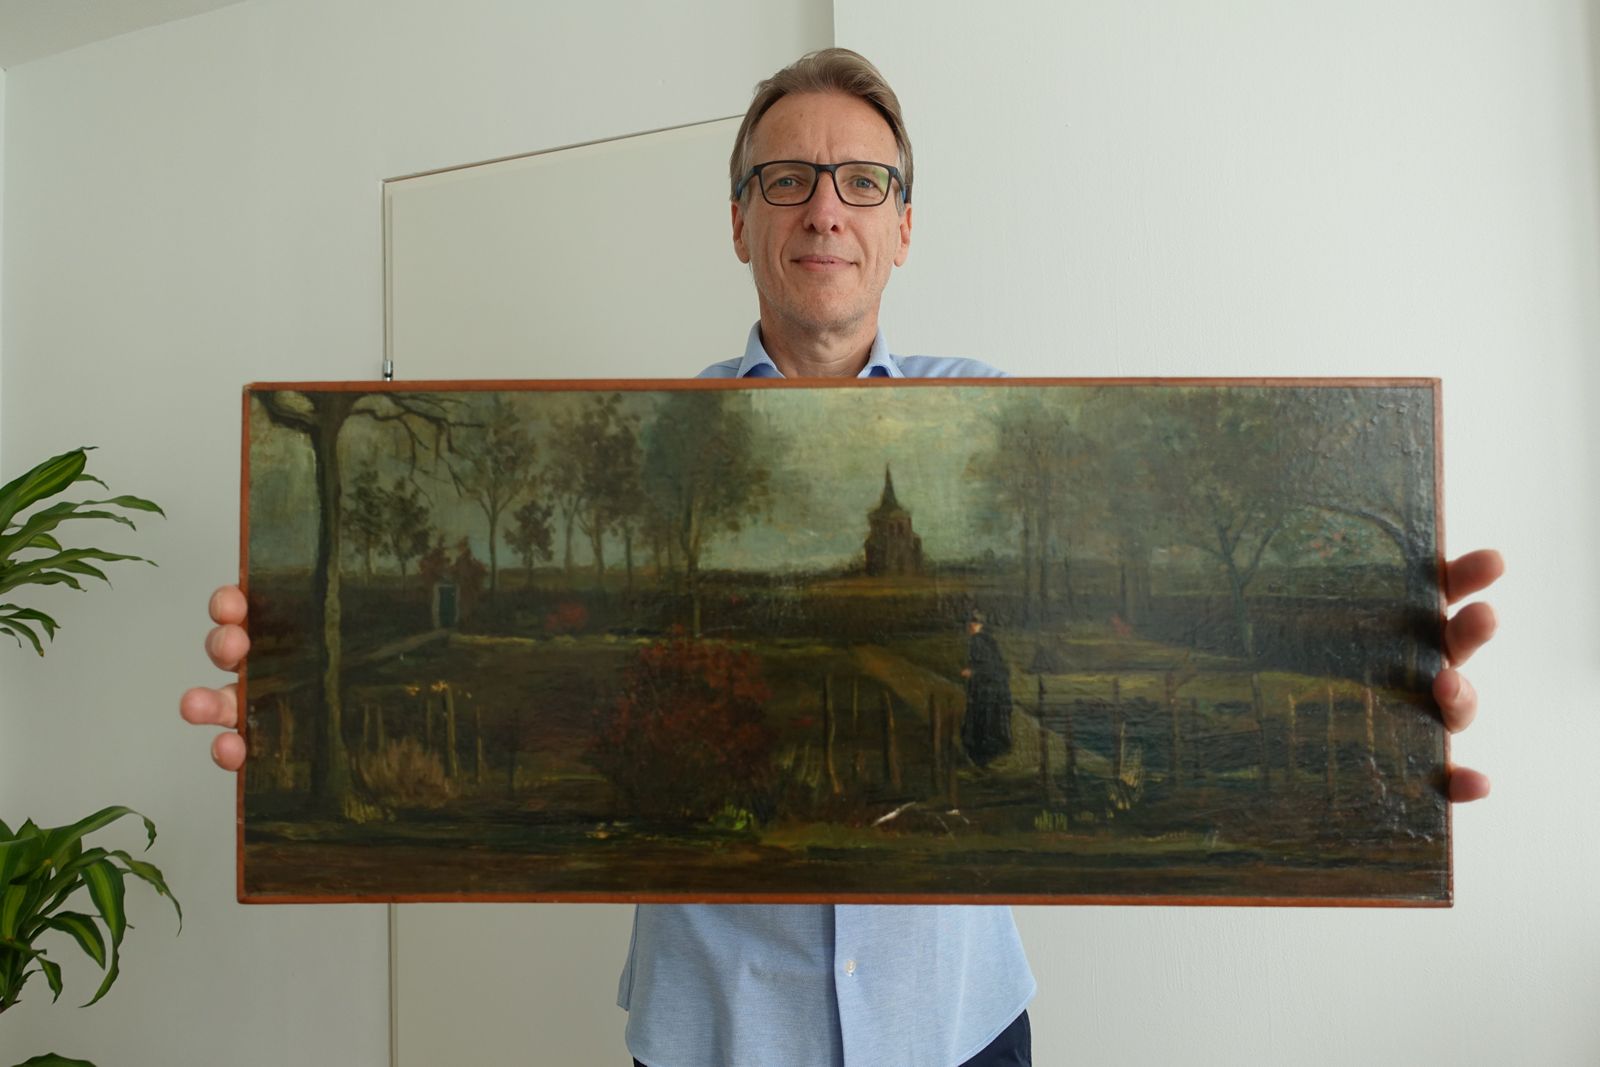 Arthur Brand, the “Indiana Jones of the art world,” negotiated the recovery of an 1884 canvas taken from a Dutch museum in March 2020 Than